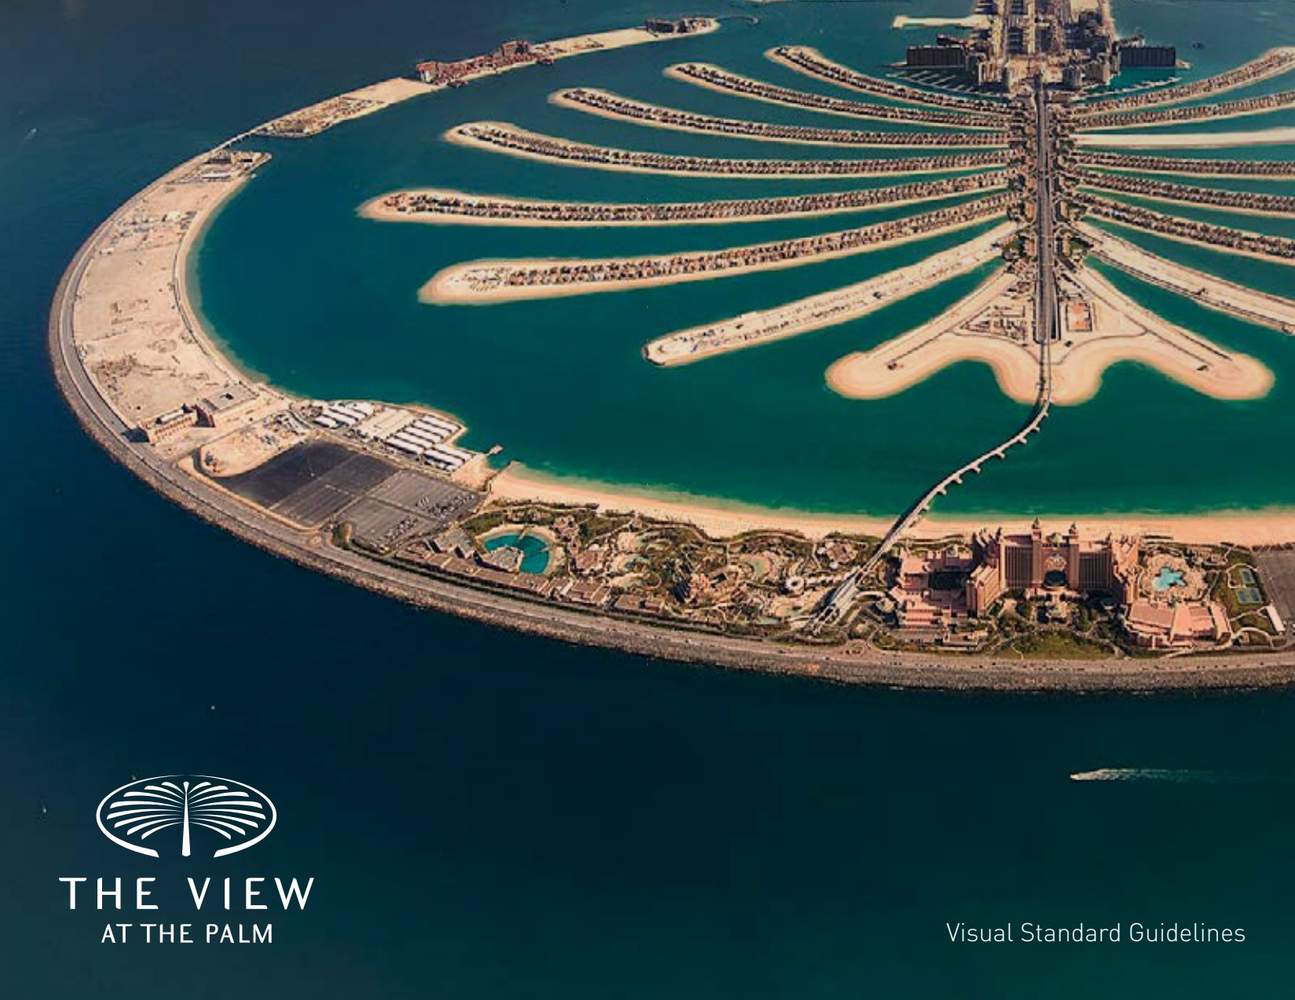 The View at The Palm offers 360 degree view of the iconic Palm Jumeirah